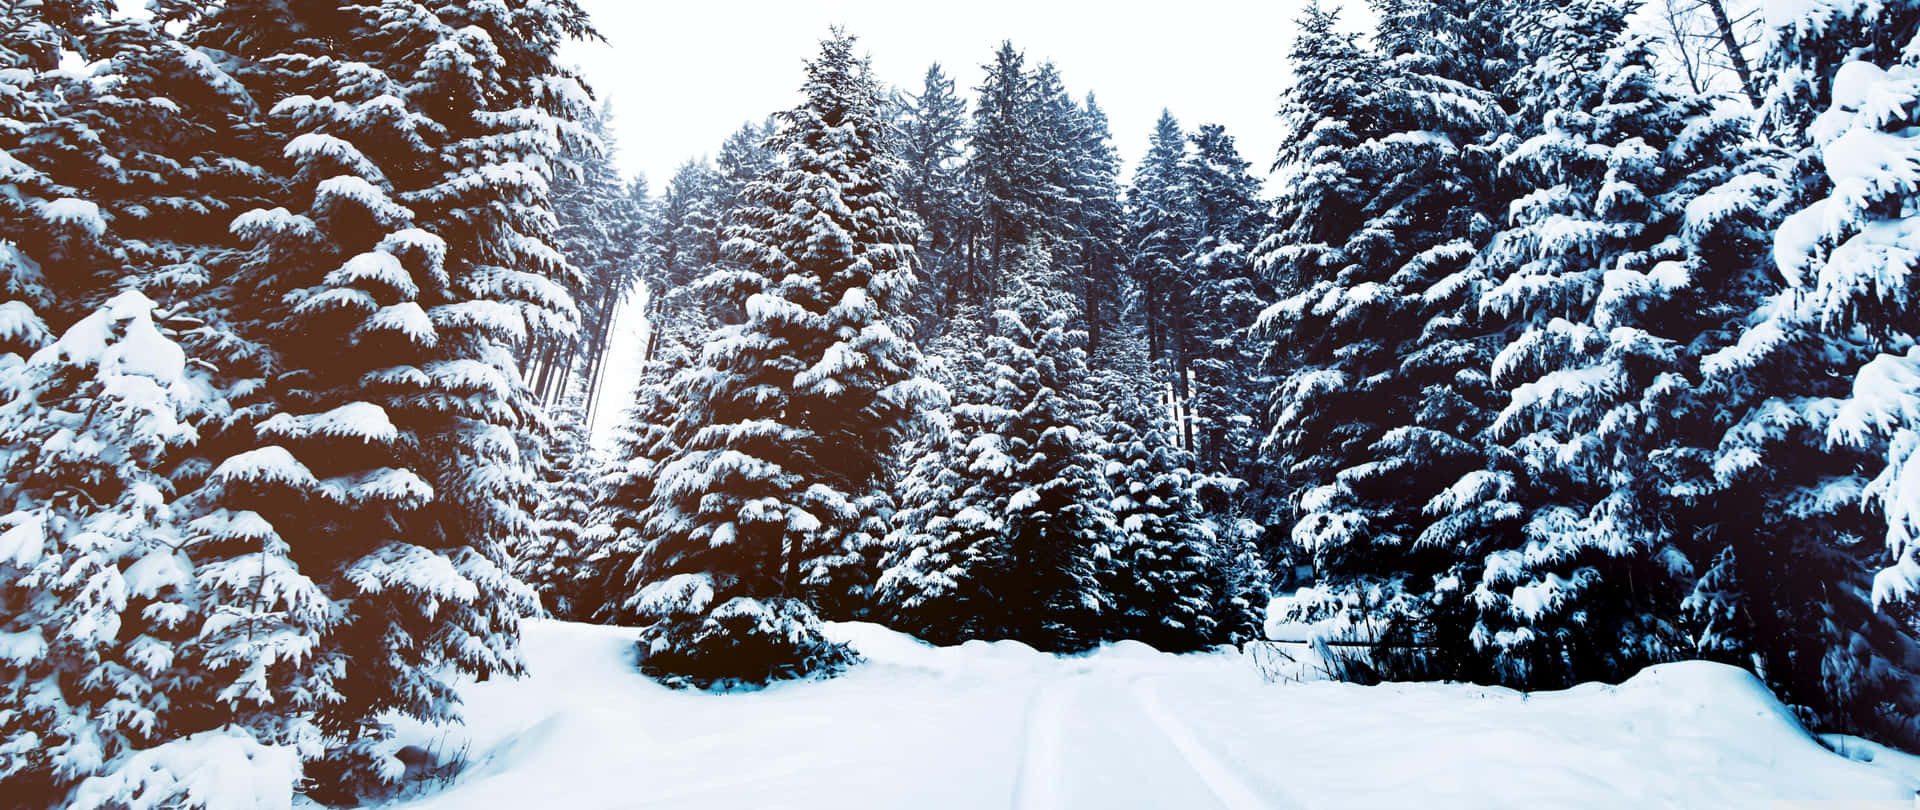 A Snow Covered Path Background